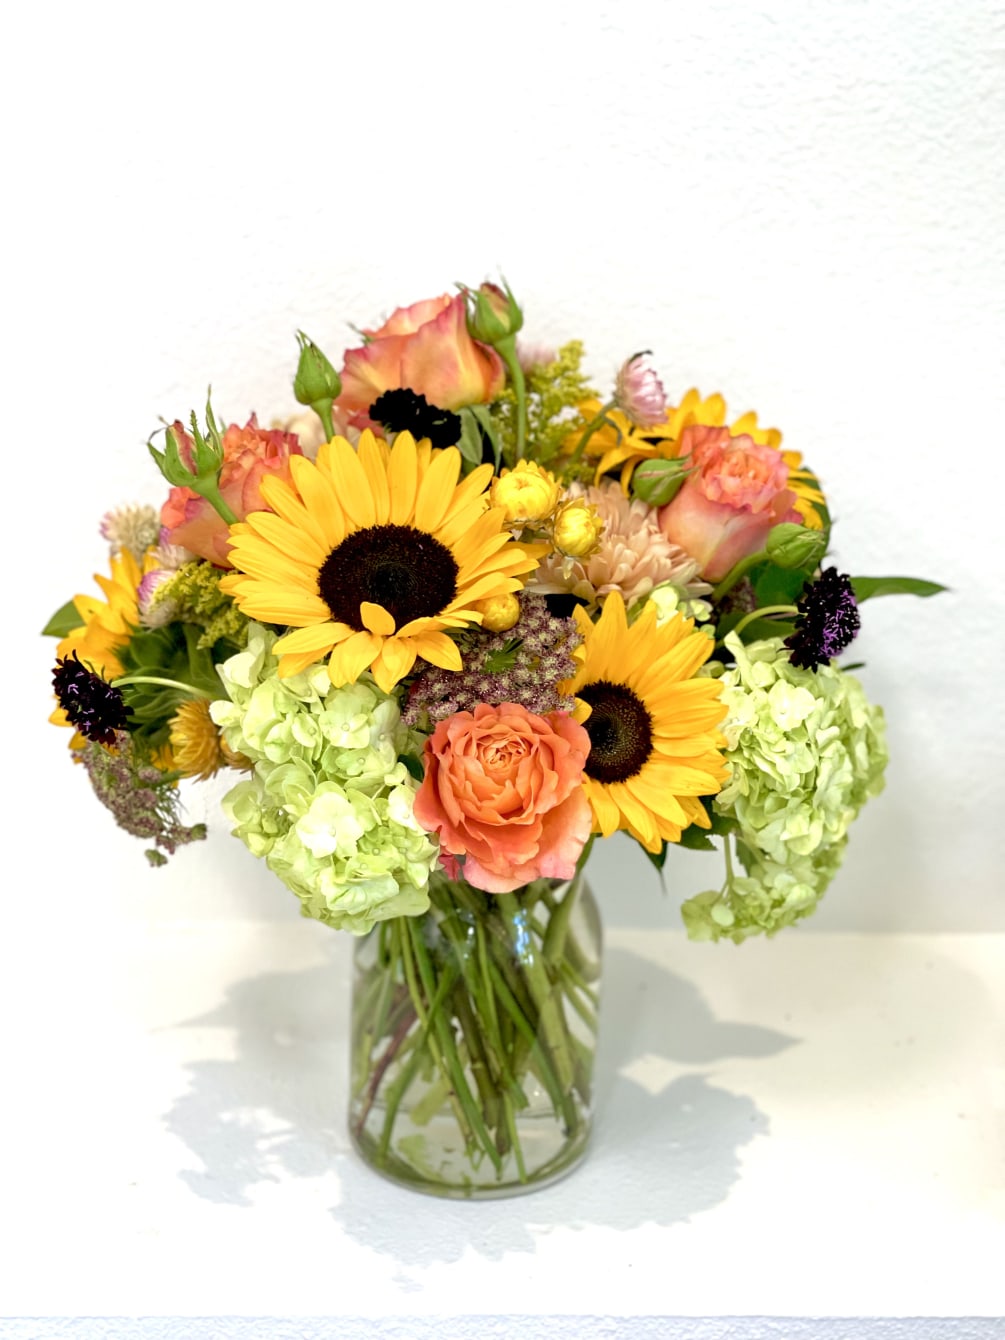 A cheerful display sure to brighten someone&rsquo;s day.